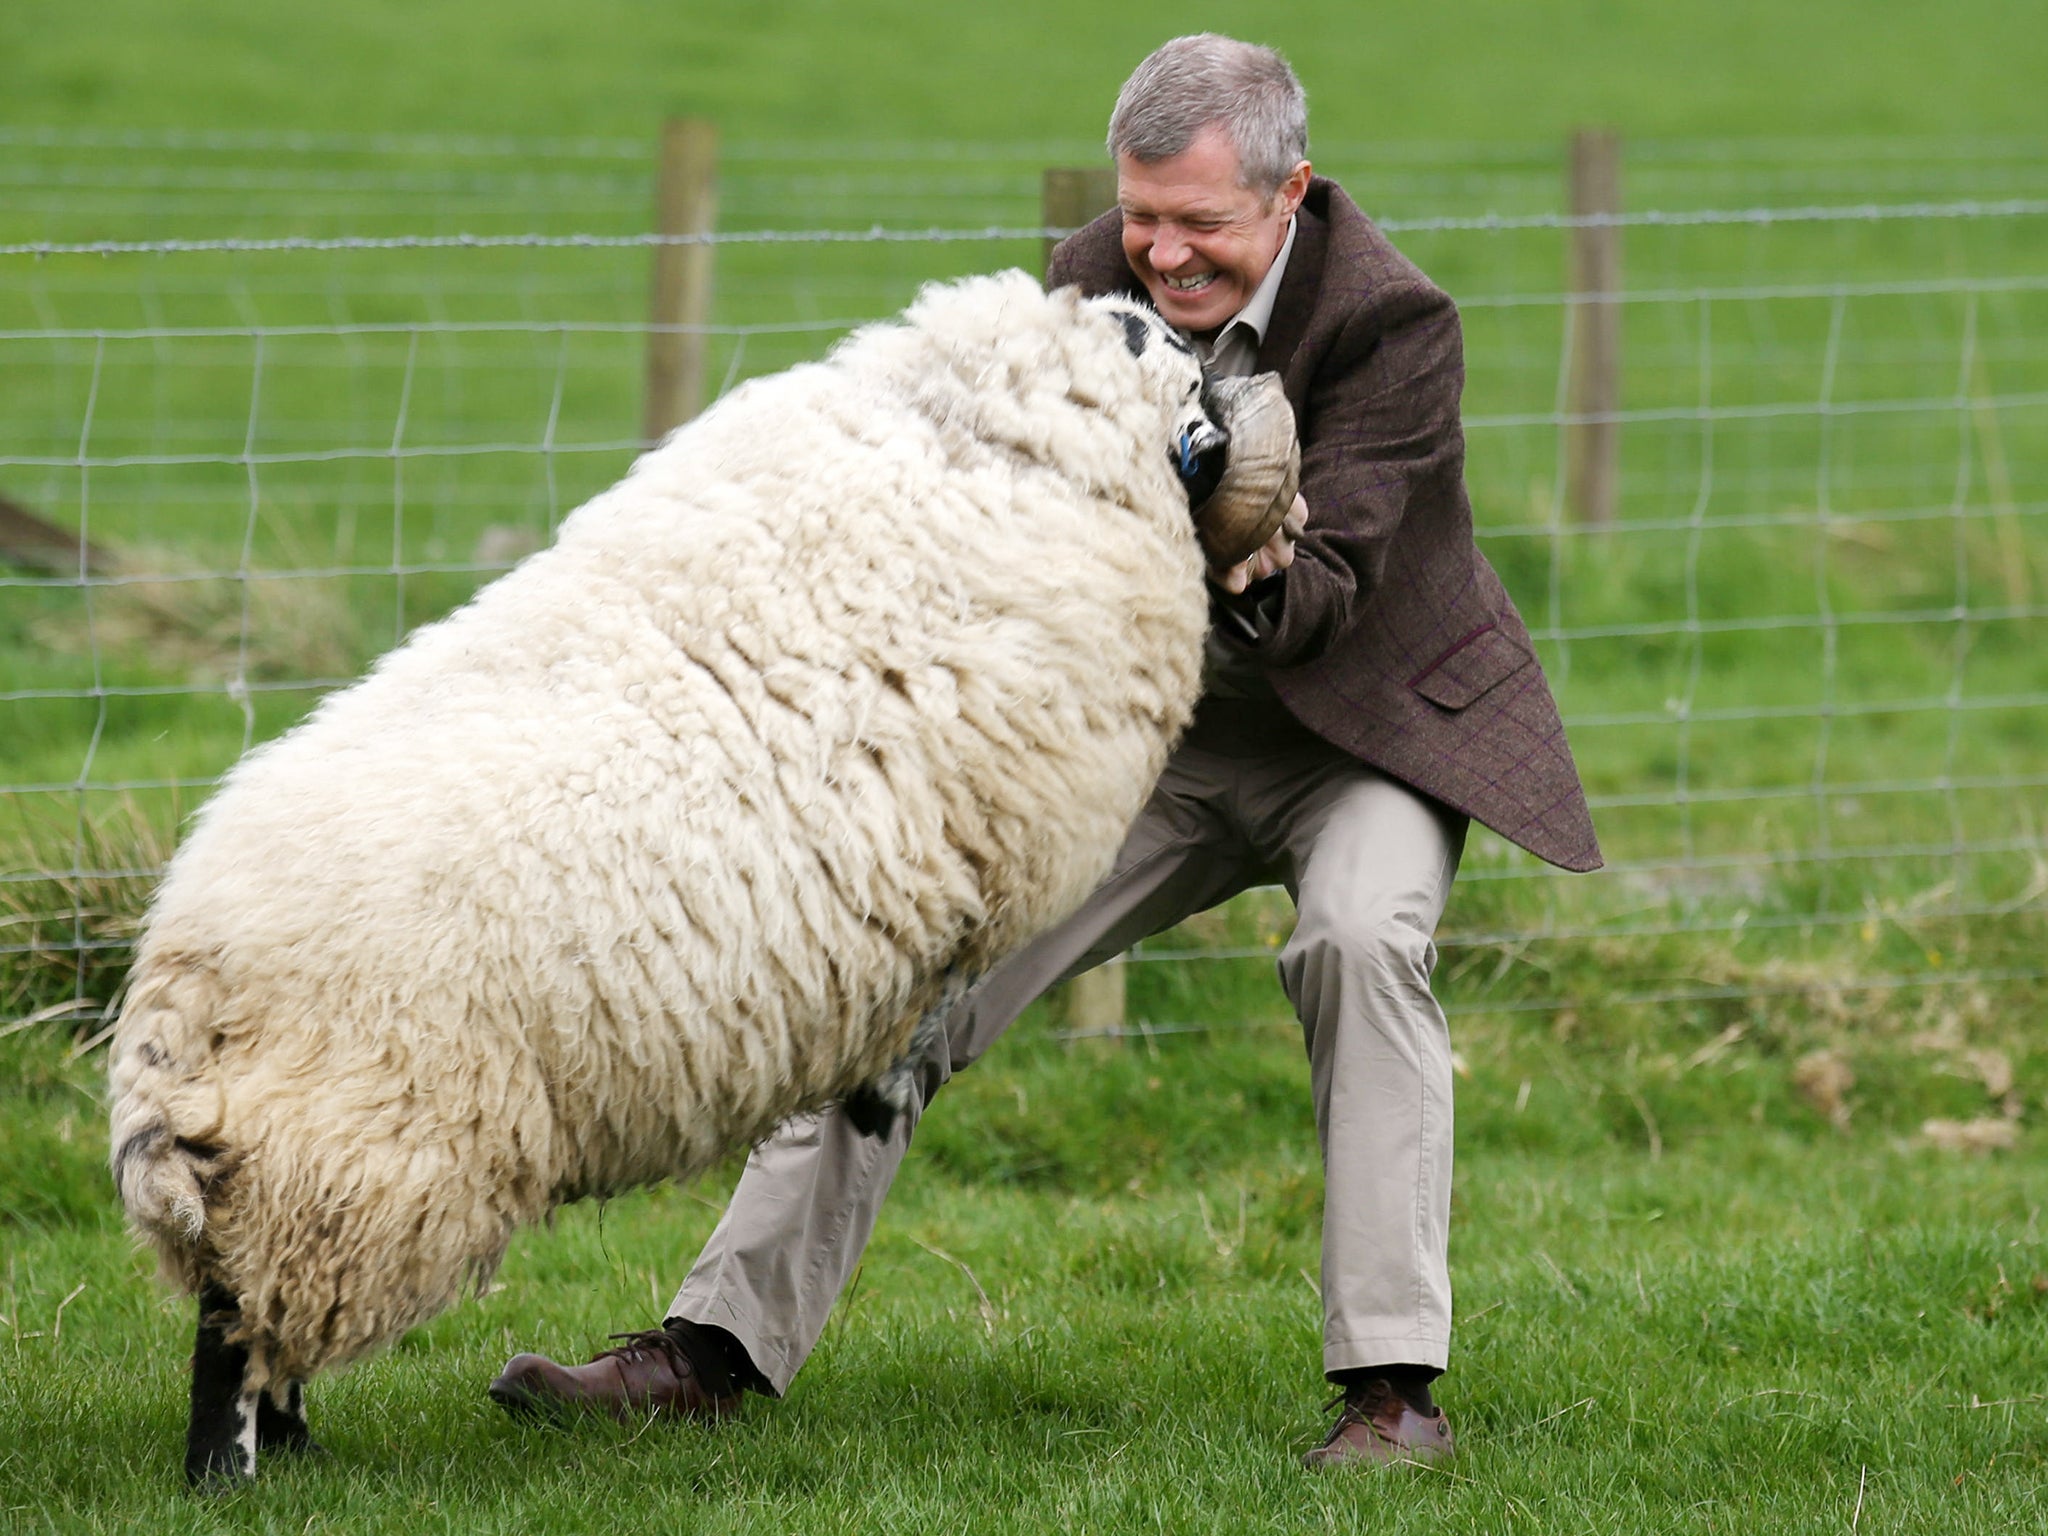 Scottish Liberal Democrat leader Willie Rennie appears to relish the fight with a ram